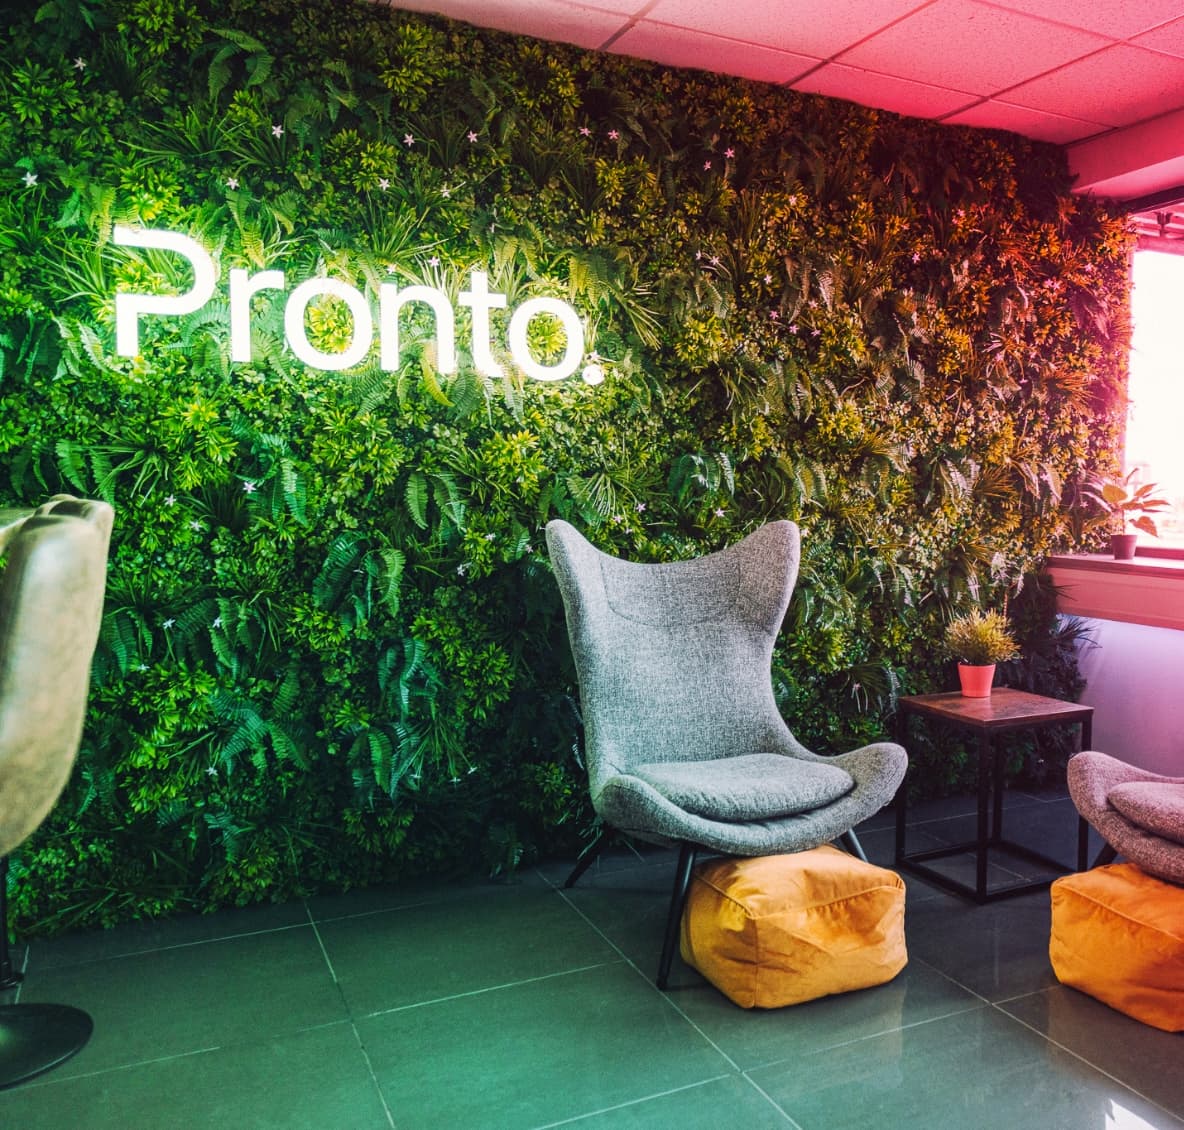 Photo of the Lead Pronto office